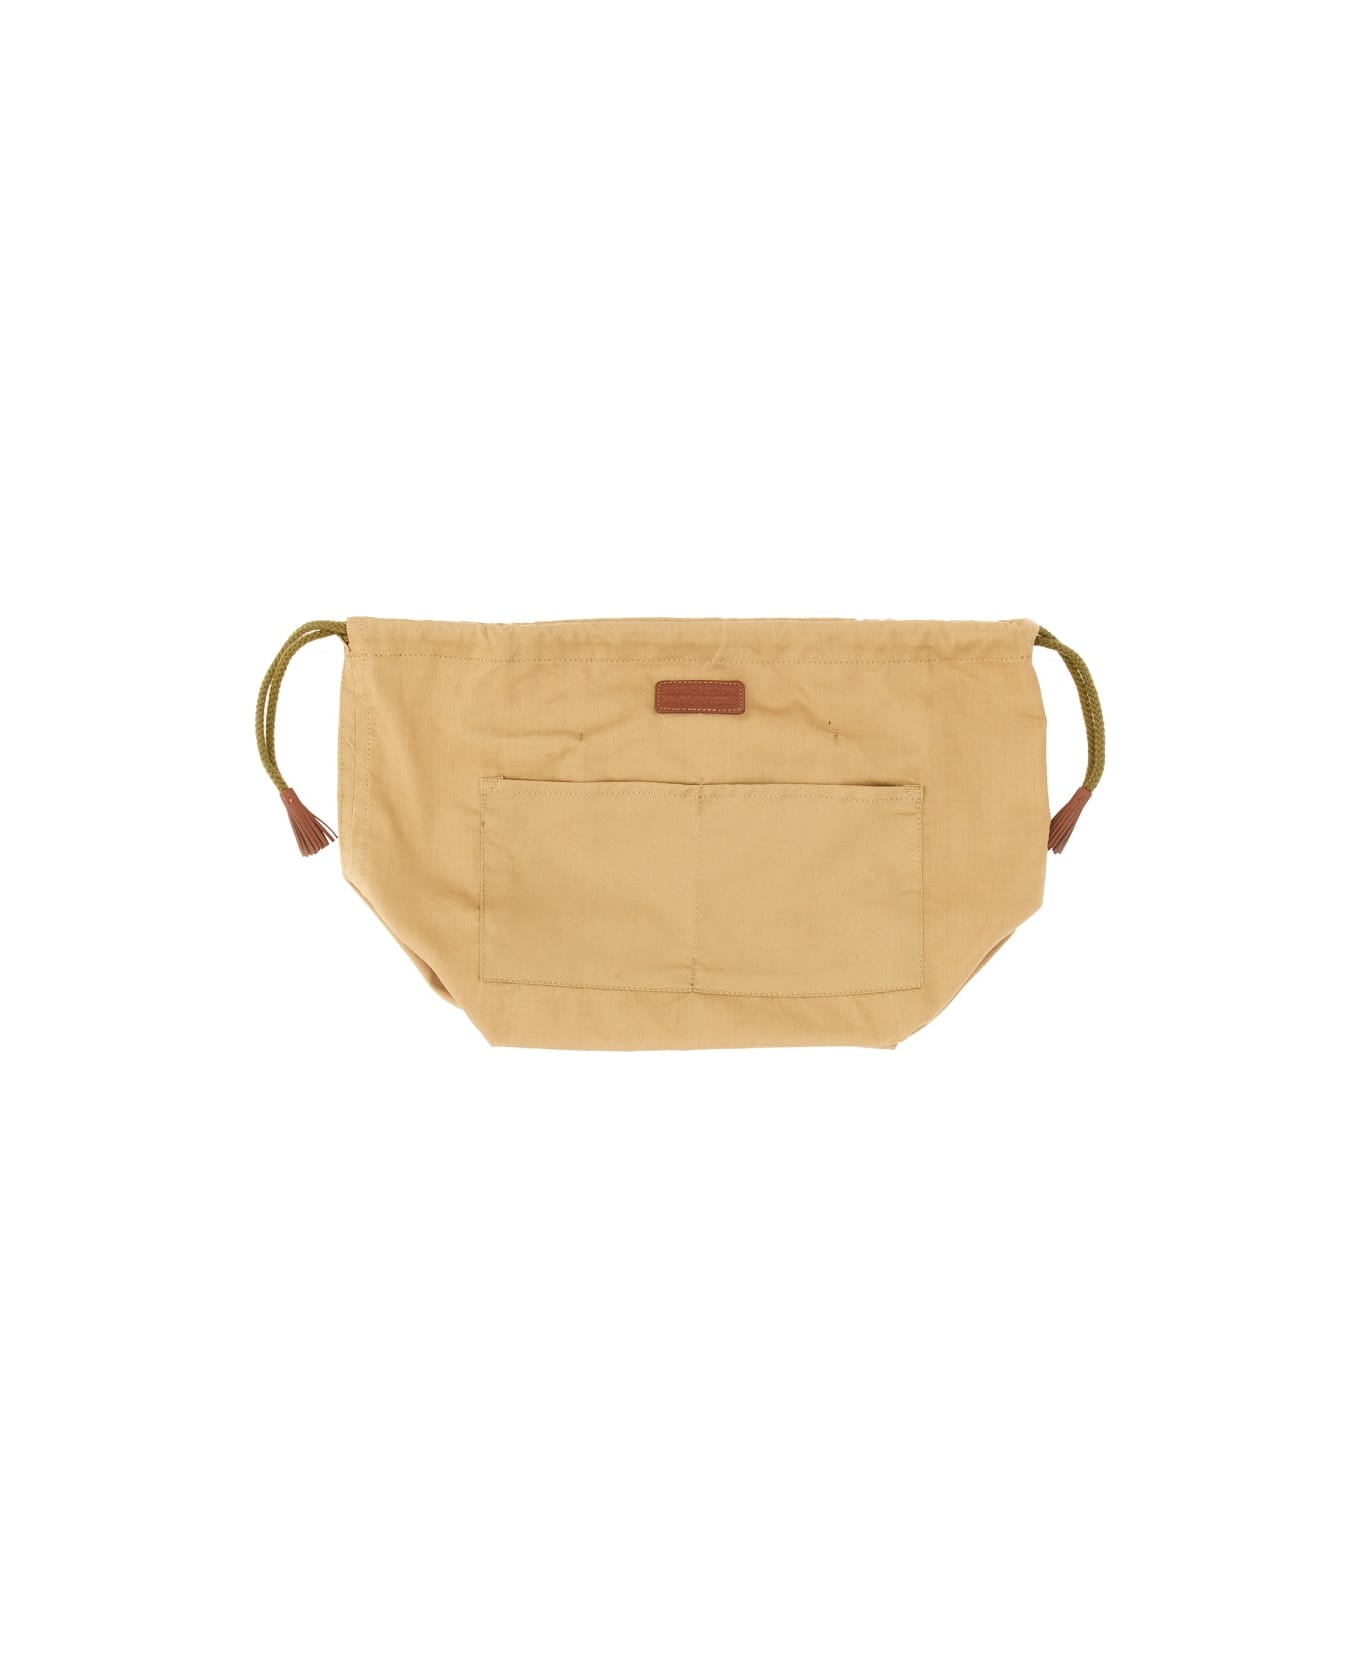 Dragon Diffusion Dust Bag Small - BEIGE バッグ